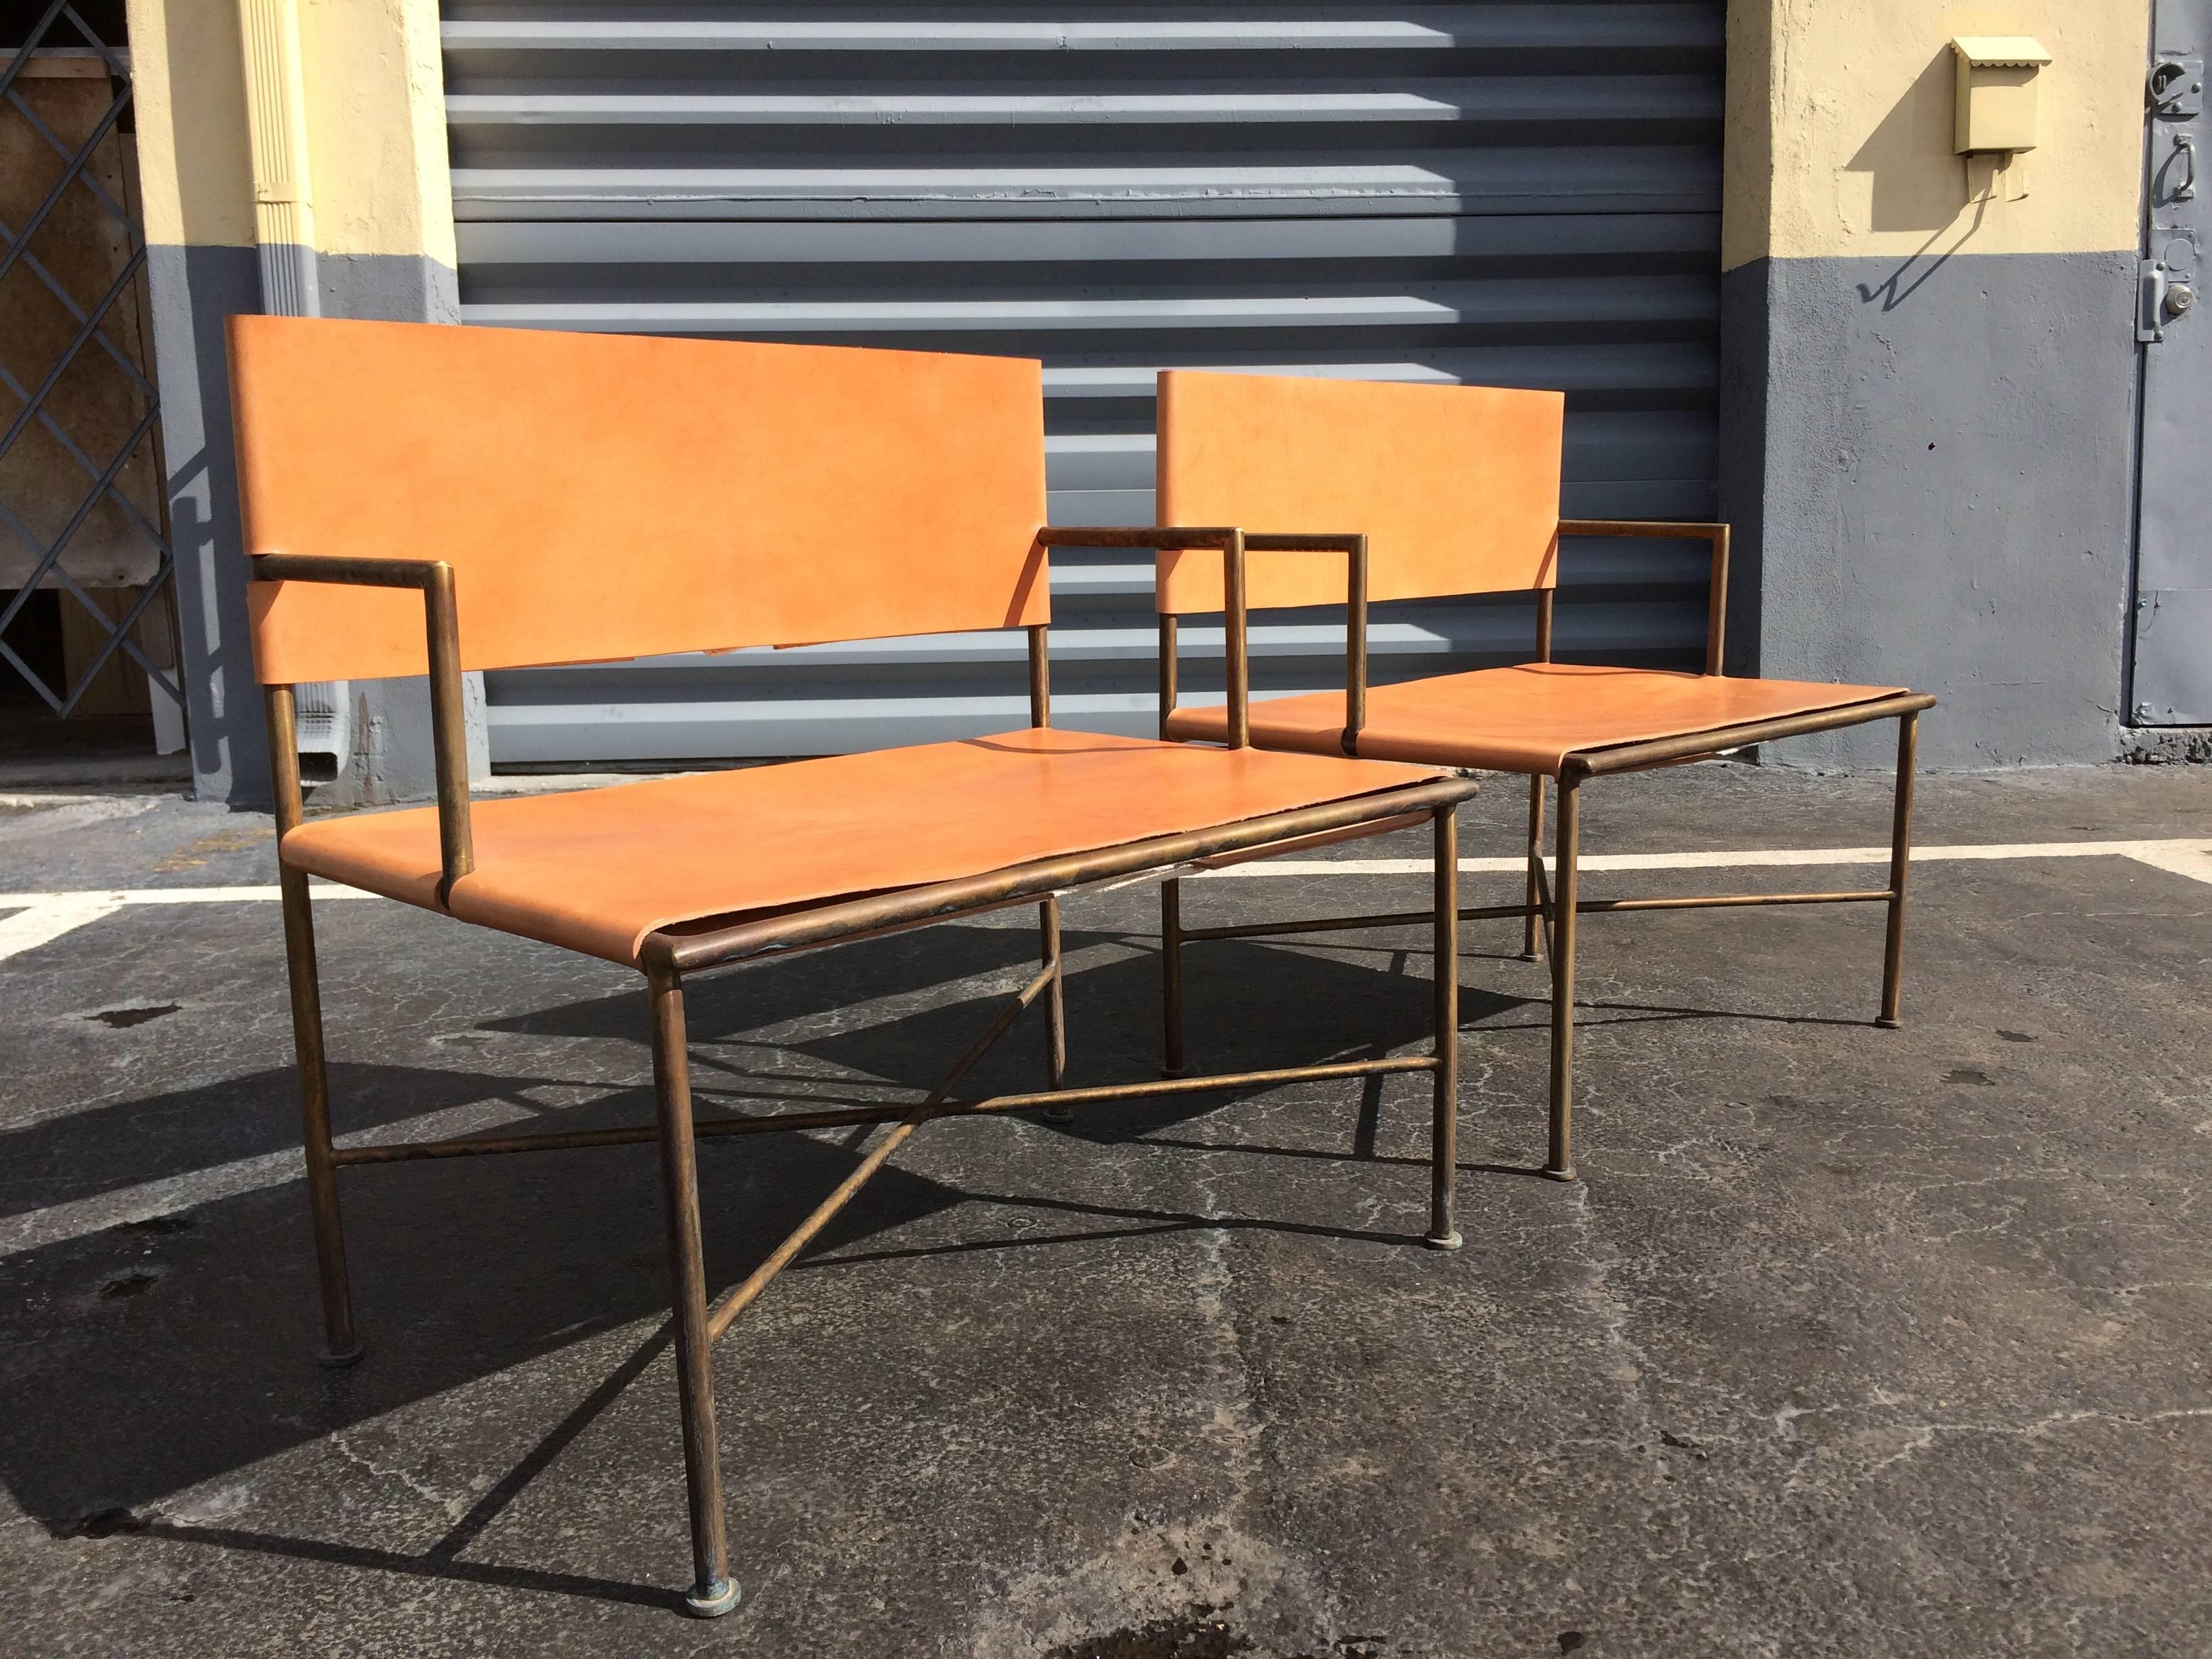 Bronze frames with saddle leather seats and backs.
Chairs are likely custom made, arm height of the chairs does not match.